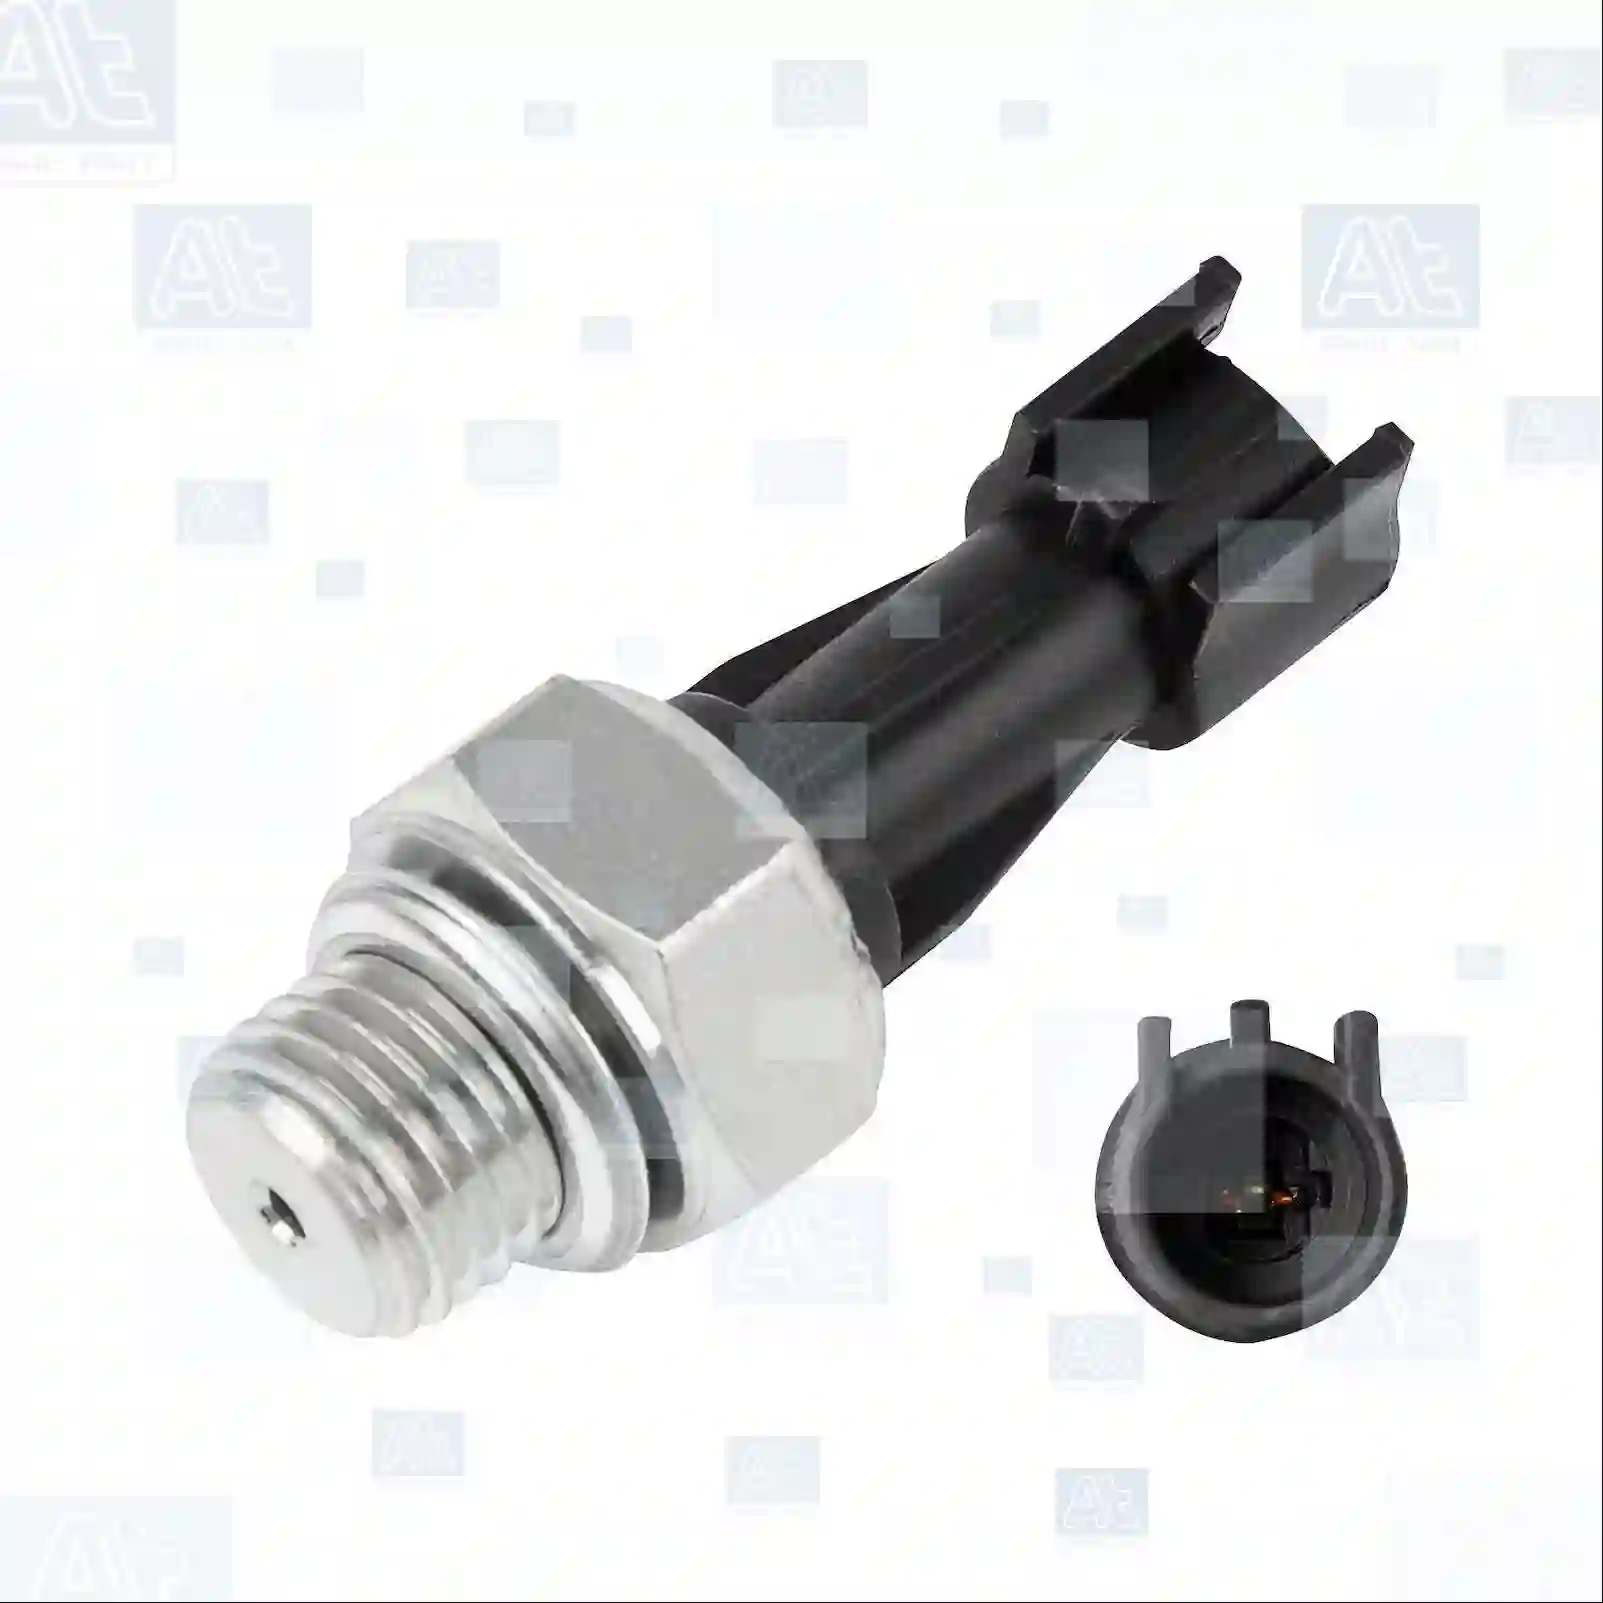 Oil pressure switch, 77700323, 55202374, 04859914, 07606596, 07681395, 07705830, 07706596, 07708168, 46420838, 500312468, 50008757, 55202374, 60593844, 60593845, 60593847, 60805536, 60807244, 60807764, 60808371, 60813321, 71749462, 25180905, 55202374, 95961350, 96281689, 96494264, 96647339, 55202374, 113198, 1131C7, 1131J5, 1131J9, 1131K7, 46420838, 4859914, 50008757, 500312468, 55202374, 60593844, 60593845, 60807244, 60808371, 71749462, 7681395, 7705830, 7706596, K68096456AA, 04859913, 04859914, 07606596, 07681395, 07705830, 07706596, 07708168, 46420838, 46472027, 500312468, 50008757, 55202374, 60593844, 60593845, 60807244, 60808371, 60813321, 71749462, 1535416, 25180905, 55202374, 55354378, 6240251, 6340415, 90335039, 90336039, 90507539, 90569684, 93177490, 93193582, 93318082, 95961350, 96494264, 96647339, 4708758, 4818219, 55202374, 6240251, 6240415, 60593845, 8-90336039-0, 04859914, 4859914, 55202374, 55202374, K68070741AA, K68096456AA, K68275324AA, 04859913, 04859914, 07606596, 07681395, 07705830, 07706596, 07708168, 46420838, 500312468, 50008757, 55202374, 60593844, 60593845, 60807244, 60808371, 60813321, 71749462, 1252557, 1252562, 1252570, 1252572, 1252578, 4708758, 4803551, 4817876, 4818219, 6240251, 6240415, 6340415, 113198, 1131C7, 1131J5, 1131J9, 1131K7, 4504585, 55202374, 55354378, 5962816, 93177490, 9544610, 50981, 1658285E00, 16582-79J50, 16582-79J50-000, 16582-85E00, 16582-85E00-000, 37820-86J00, 37820-86J00-000, 37820-N86J0-000 ||  77700323 At Spare Part | Engine, Accelerator Pedal, Camshaft, Connecting Rod, Crankcase, Crankshaft, Cylinder Head, Engine Suspension Mountings, Exhaust Manifold, Exhaust Gas Recirculation, Filter Kits, Flywheel Housing, General Overhaul Kits, Engine, Intake Manifold, Oil Cleaner, Oil Cooler, Oil Filter, Oil Pump, Oil Sump, Piston & Liner, Sensor & Switch, Timing Case, Turbocharger, Cooling System, Belt Tensioner, Coolant Filter, Coolant Pipe, Corrosion Prevention Agent, Drive, Expansion Tank, Fan, Intercooler, Monitors & Gauges, Radiator, Thermostat, V-Belt / Timing belt, Water Pump, Fuel System, Electronical Injector Unit, Feed Pump, Fuel Filter, cpl., Fuel Gauge Sender,  Fuel Line, Fuel Pump, Fuel Tank, Injection Line Kit, Injection Pump, Exhaust System, Clutch & Pedal, Gearbox, Propeller Shaft, Axles, Brake System, Hubs & Wheels, Suspension, Leaf Spring, Universal Parts / Accessories, Steering, Electrical System, Cabin Oil pressure switch, 77700323, 55202374, 04859914, 07606596, 07681395, 07705830, 07706596, 07708168, 46420838, 500312468, 50008757, 55202374, 60593844, 60593845, 60593847, 60805536, 60807244, 60807764, 60808371, 60813321, 71749462, 25180905, 55202374, 95961350, 96281689, 96494264, 96647339, 55202374, 113198, 1131C7, 1131J5, 1131J9, 1131K7, 46420838, 4859914, 50008757, 500312468, 55202374, 60593844, 60593845, 60807244, 60808371, 71749462, 7681395, 7705830, 7706596, K68096456AA, 04859913, 04859914, 07606596, 07681395, 07705830, 07706596, 07708168, 46420838, 46472027, 500312468, 50008757, 55202374, 60593844, 60593845, 60807244, 60808371, 60813321, 71749462, 1535416, 25180905, 55202374, 55354378, 6240251, 6340415, 90335039, 90336039, 90507539, 90569684, 93177490, 93193582, 93318082, 95961350, 96494264, 96647339, 4708758, 4818219, 55202374, 6240251, 6240415, 60593845, 8-90336039-0, 04859914, 4859914, 55202374, 55202374, K68070741AA, K68096456AA, K68275324AA, 04859913, 04859914, 07606596, 07681395, 07705830, 07706596, 07708168, 46420838, 500312468, 50008757, 55202374, 60593844, 60593845, 60807244, 60808371, 60813321, 71749462, 1252557, 1252562, 1252570, 1252572, 1252578, 4708758, 4803551, 4817876, 4818219, 6240251, 6240415, 6340415, 113198, 1131C7, 1131J5, 1131J9, 1131K7, 4504585, 55202374, 55354378, 5962816, 93177490, 9544610, 50981, 1658285E00, 16582-79J50, 16582-79J50-000, 16582-85E00, 16582-85E00-000, 37820-86J00, 37820-86J00-000, 37820-N86J0-000 ||  77700323 At Spare Part | Engine, Accelerator Pedal, Camshaft, Connecting Rod, Crankcase, Crankshaft, Cylinder Head, Engine Suspension Mountings, Exhaust Manifold, Exhaust Gas Recirculation, Filter Kits, Flywheel Housing, General Overhaul Kits, Engine, Intake Manifold, Oil Cleaner, Oil Cooler, Oil Filter, Oil Pump, Oil Sump, Piston & Liner, Sensor & Switch, Timing Case, Turbocharger, Cooling System, Belt Tensioner, Coolant Filter, Coolant Pipe, Corrosion Prevention Agent, Drive, Expansion Tank, Fan, Intercooler, Monitors & Gauges, Radiator, Thermostat, V-Belt / Timing belt, Water Pump, Fuel System, Electronical Injector Unit, Feed Pump, Fuel Filter, cpl., Fuel Gauge Sender,  Fuel Line, Fuel Pump, Fuel Tank, Injection Line Kit, Injection Pump, Exhaust System, Clutch & Pedal, Gearbox, Propeller Shaft, Axles, Brake System, Hubs & Wheels, Suspension, Leaf Spring, Universal Parts / Accessories, Steering, Electrical System, Cabin